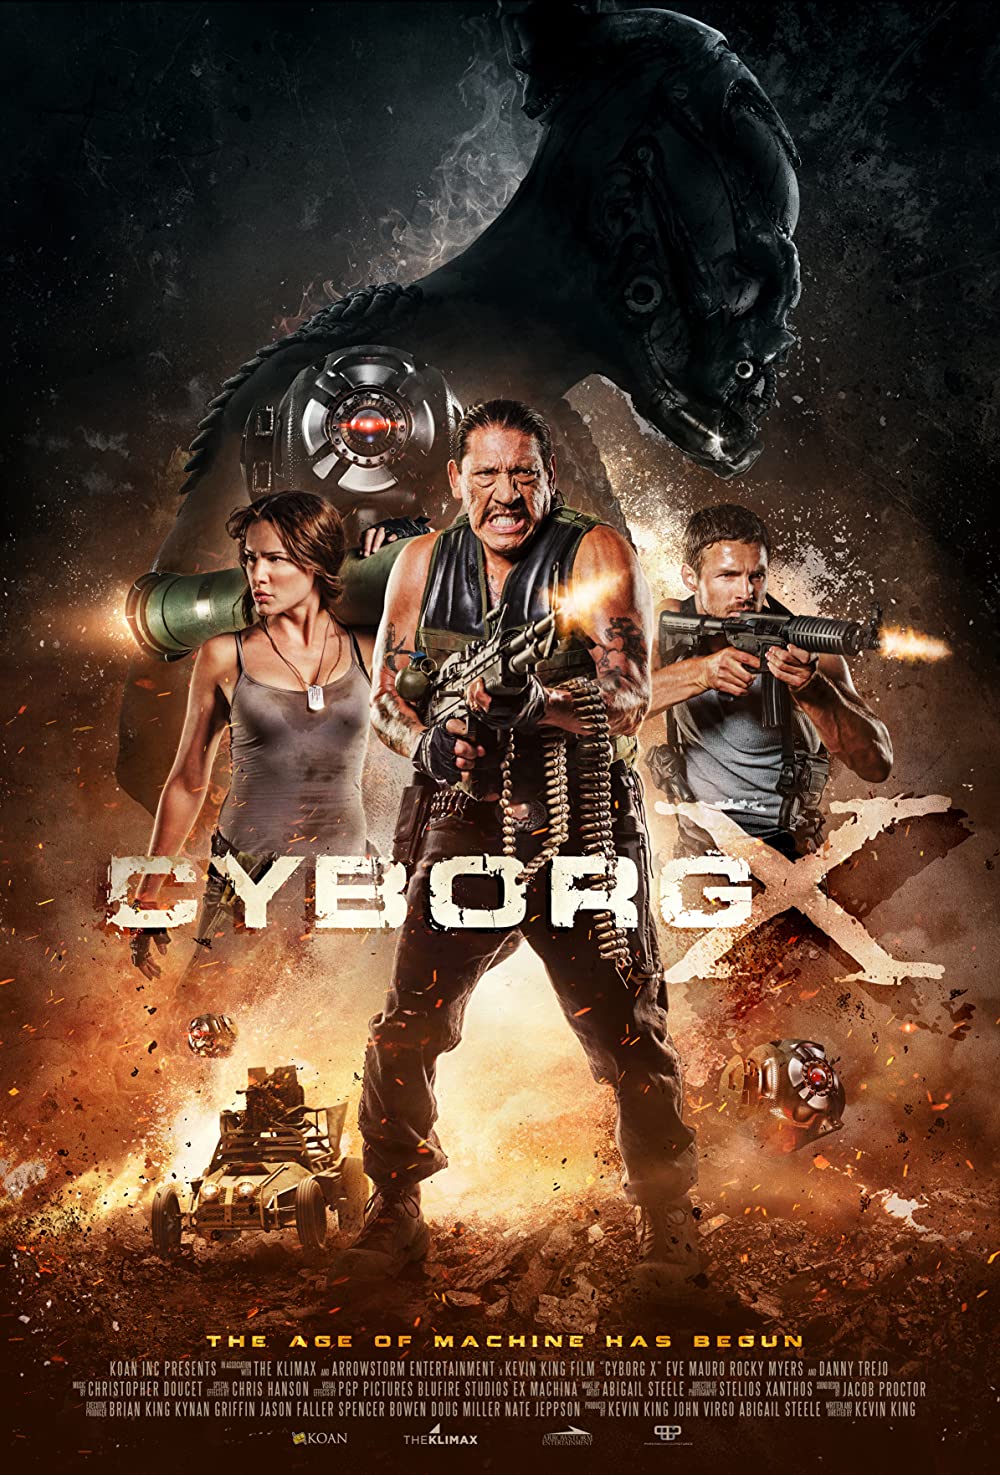 Cyborg X 2016 UNRATED Hindi Dubbed 480p BluRay ESub 300MB Download